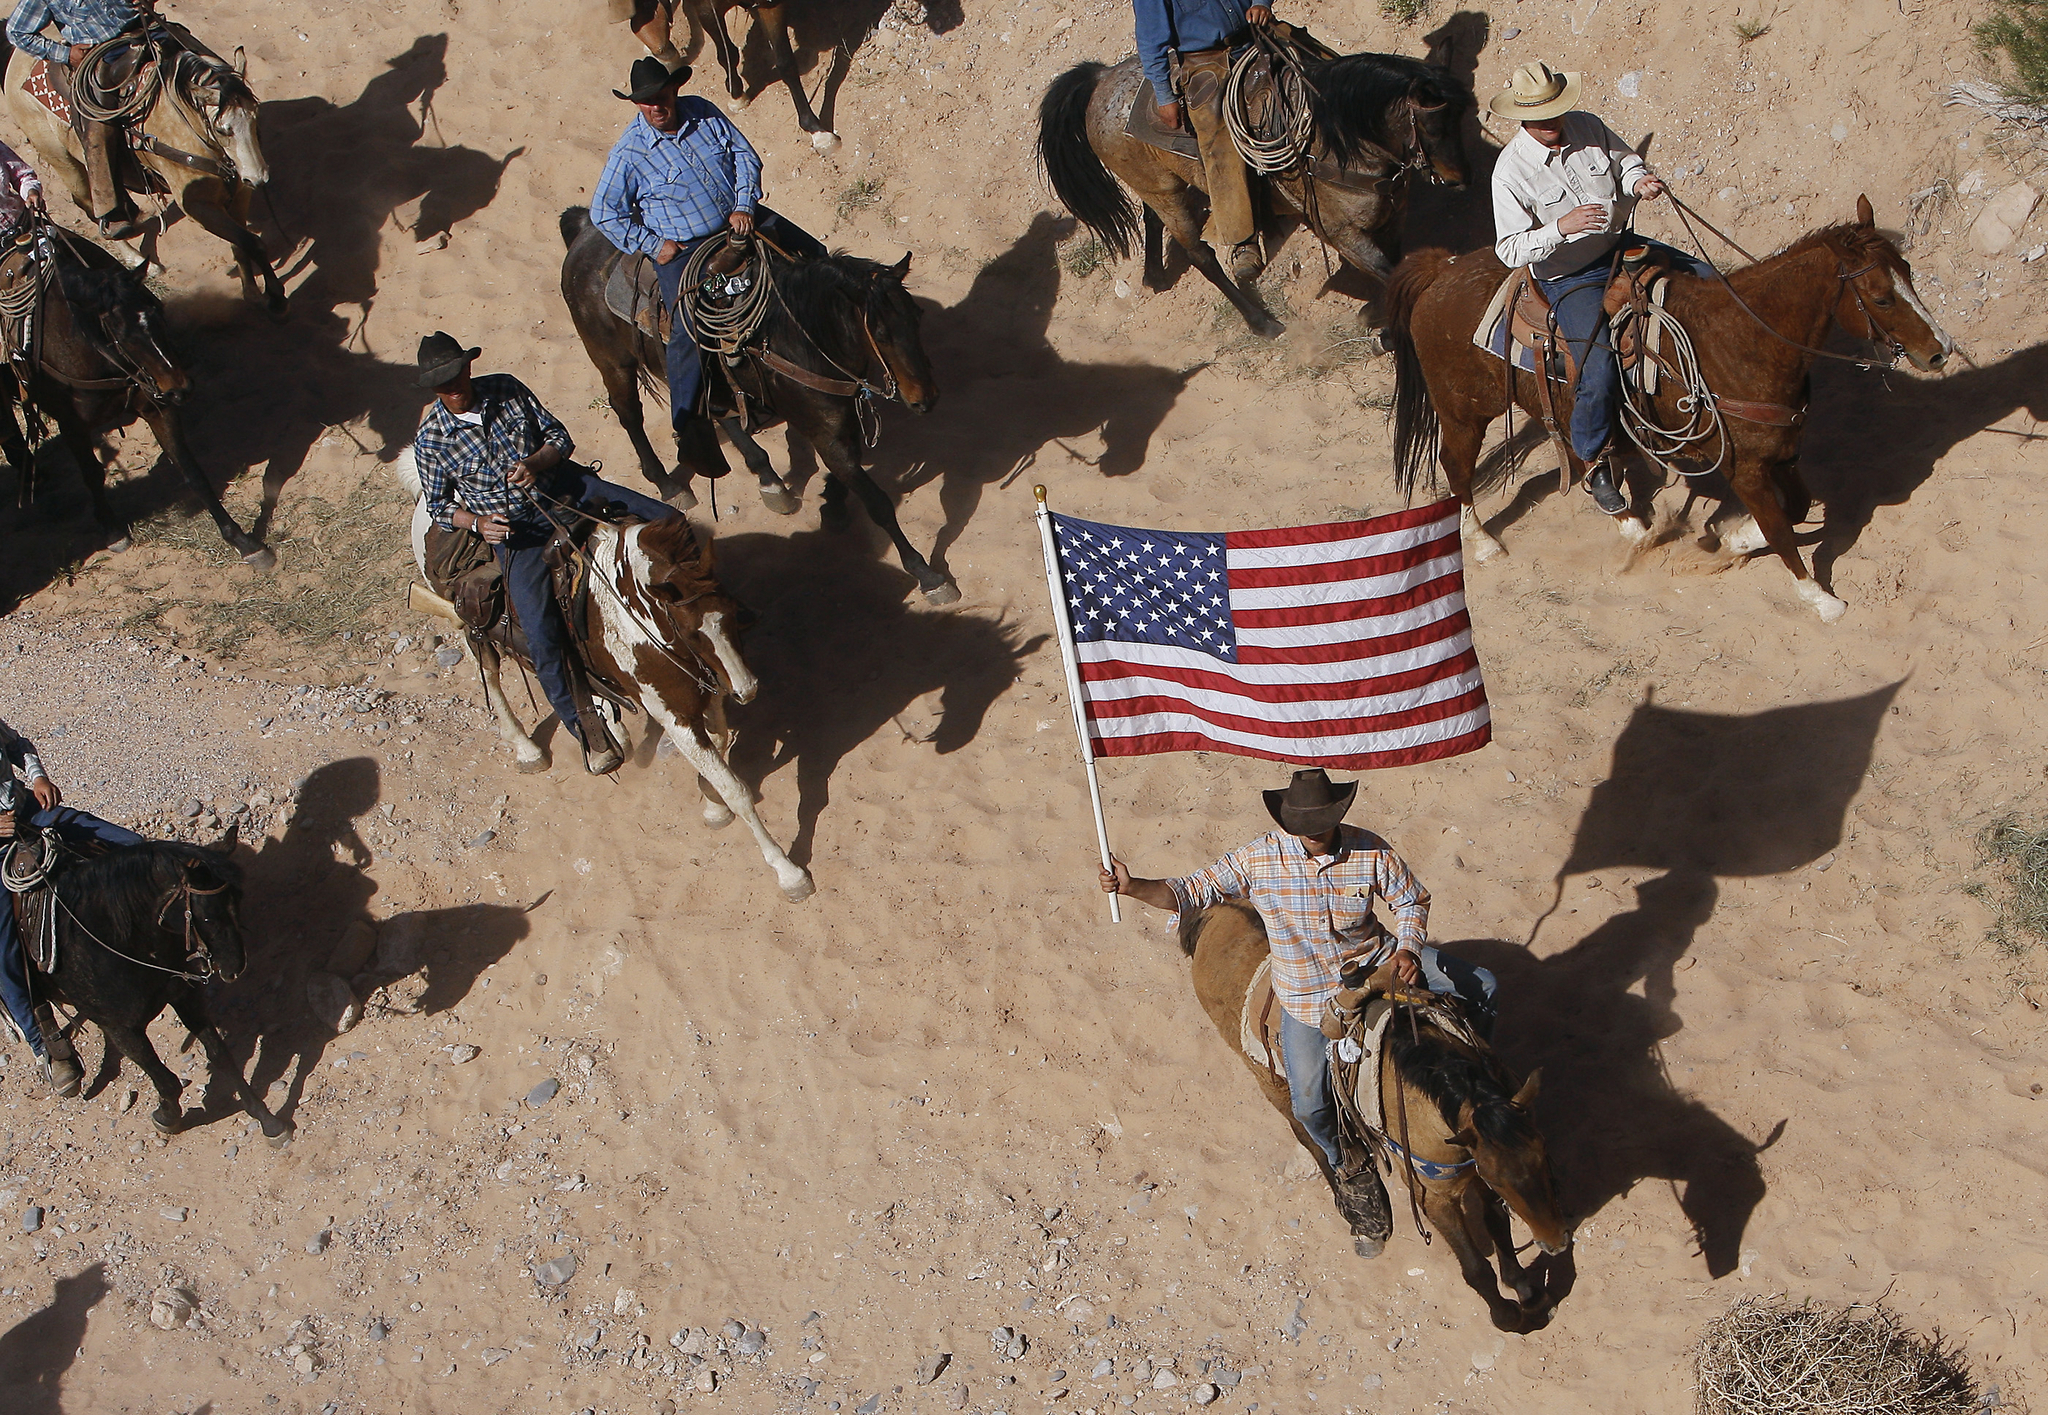 In this April 12, 2014 photo, the Bundy family and their supporters fly the American flag as their cattle is released by the Bureau of Land Management back onto public land outside of Bunkerville, Nev. A federal judge in Nevada is considering crucial rulings about what jurors will hear in the trial of six defendants accused of stopping U.S. agents at gunpoint from rounding up cattle near Cliven Bundy’s ranch in April 2014. (Jason Bean | Las Vegas Review-Journal)